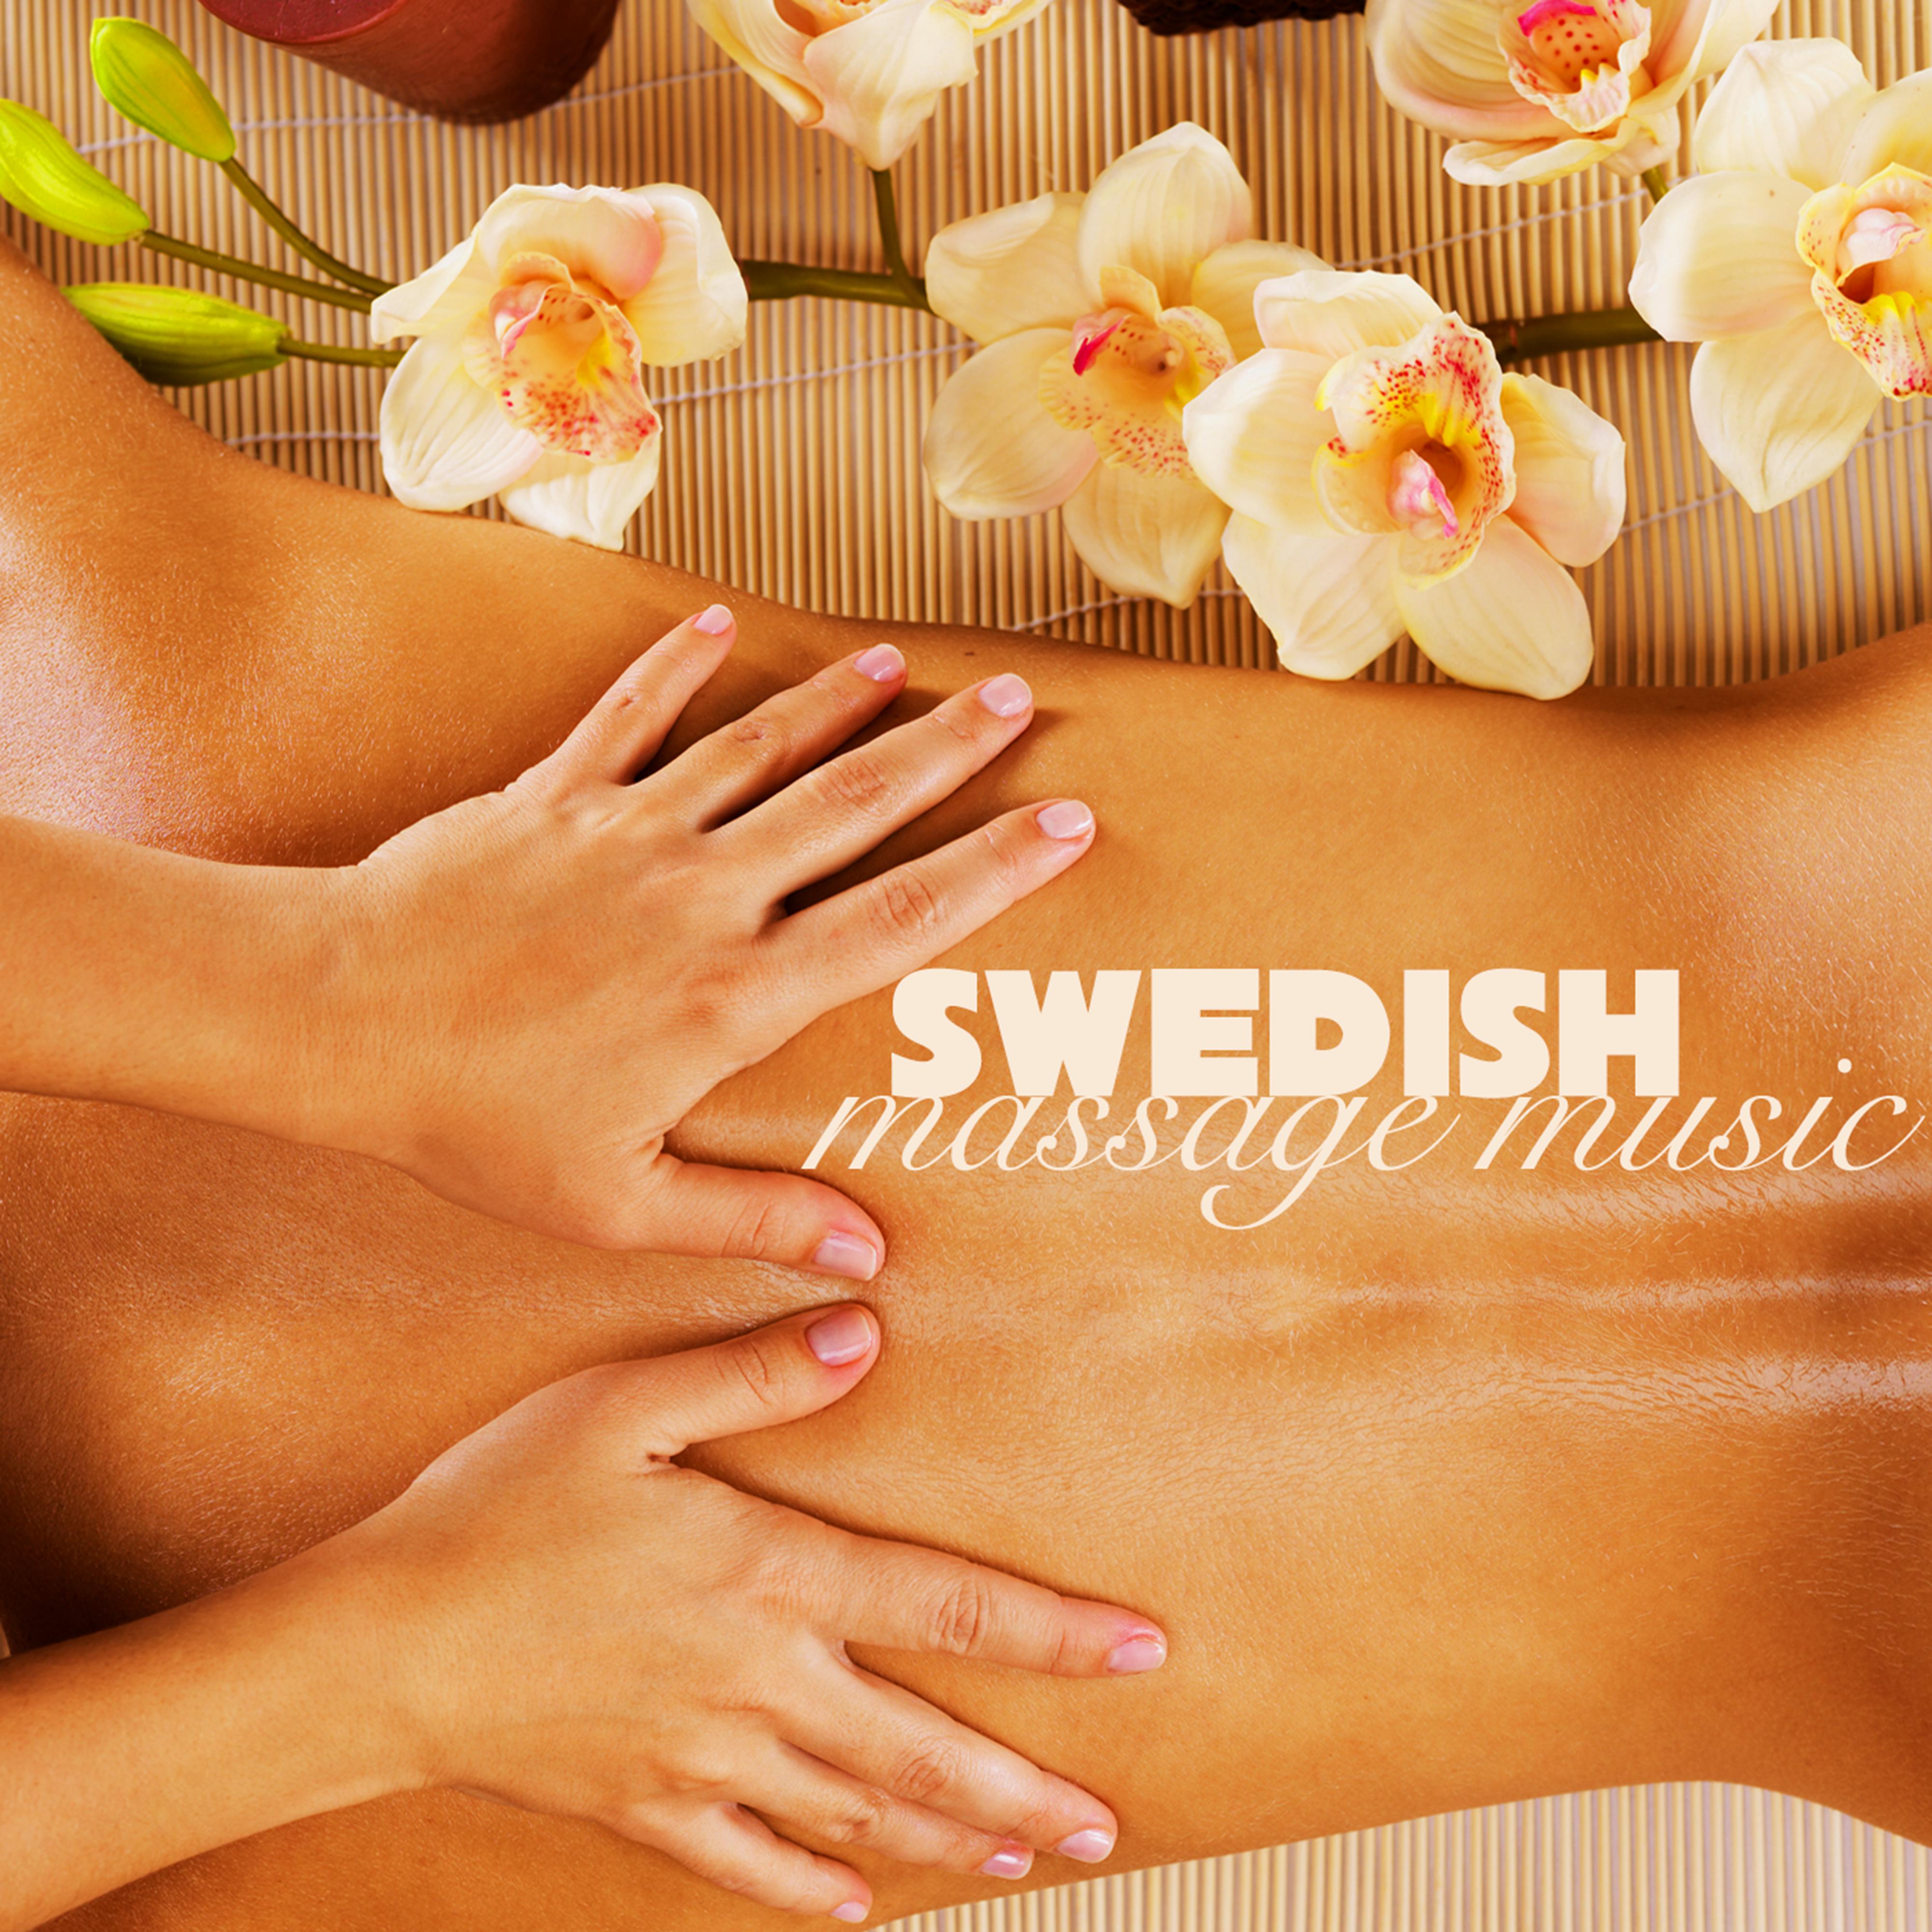 Swedish Massage Music - Relaxing Instrumental Nature Spa Sounds for Massage Therapy and Serenity